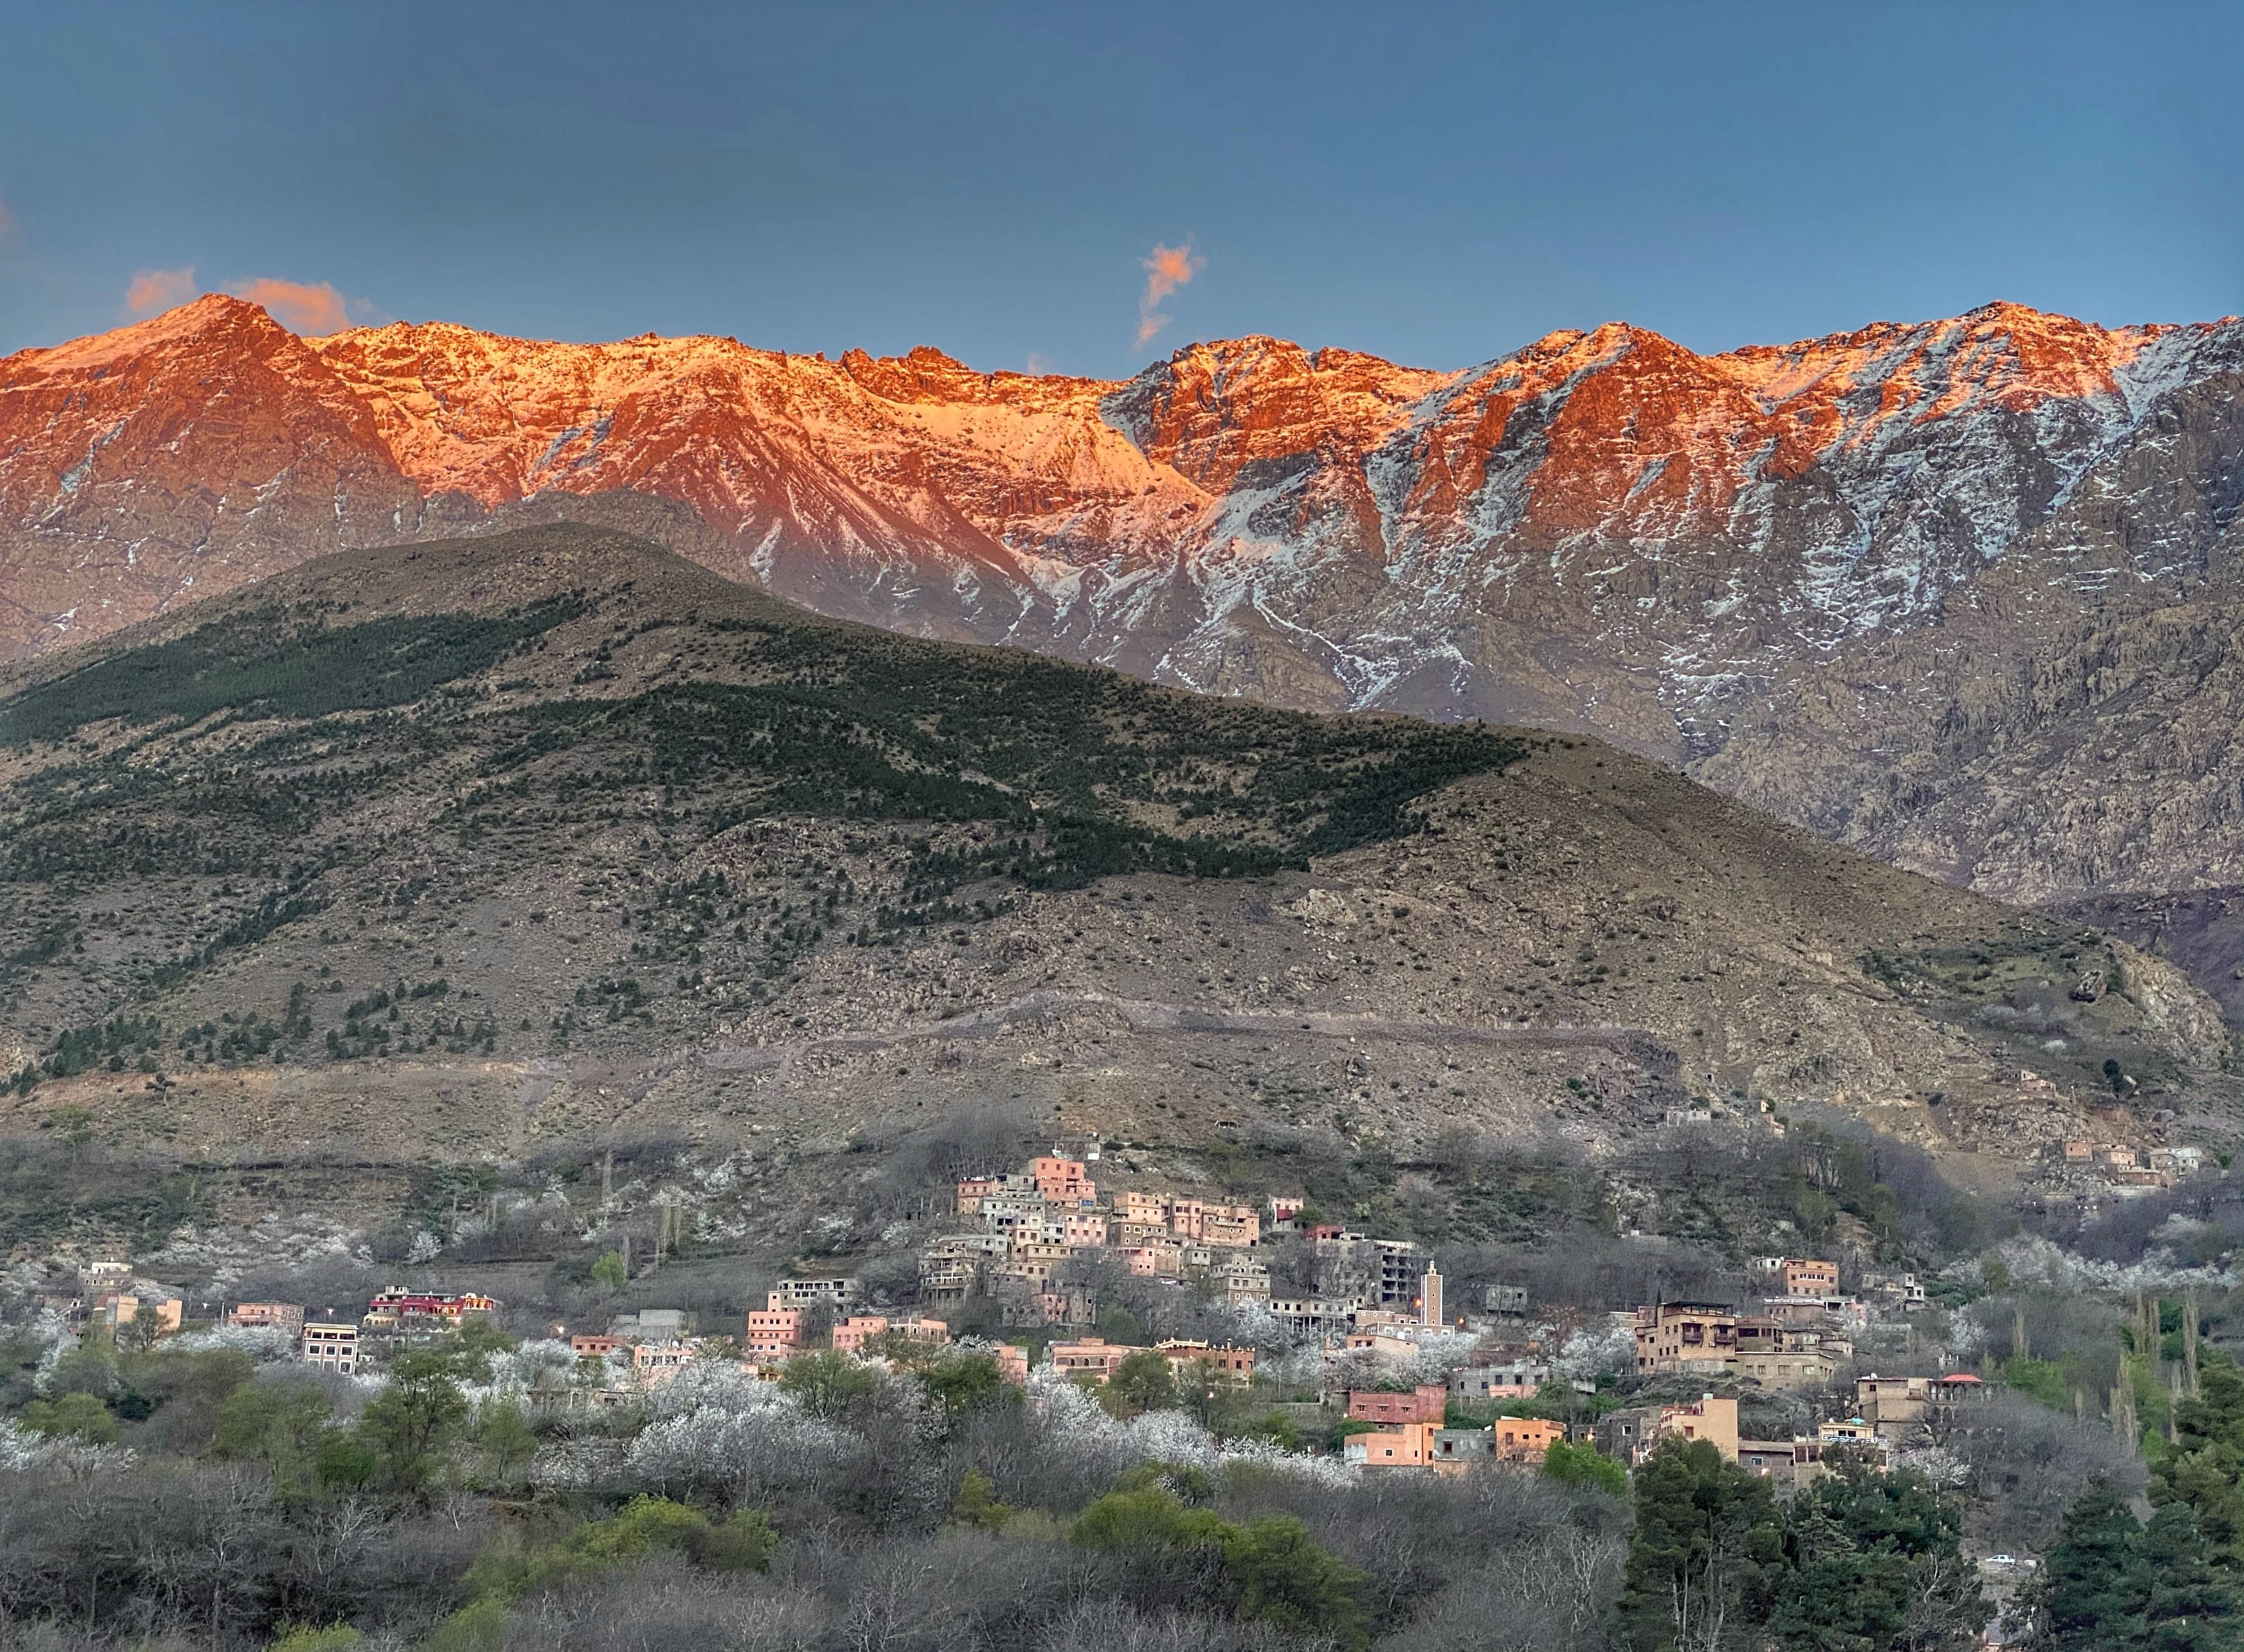 Sunset over the Atlas Mountains in Morocco. A small village sits in the valley.